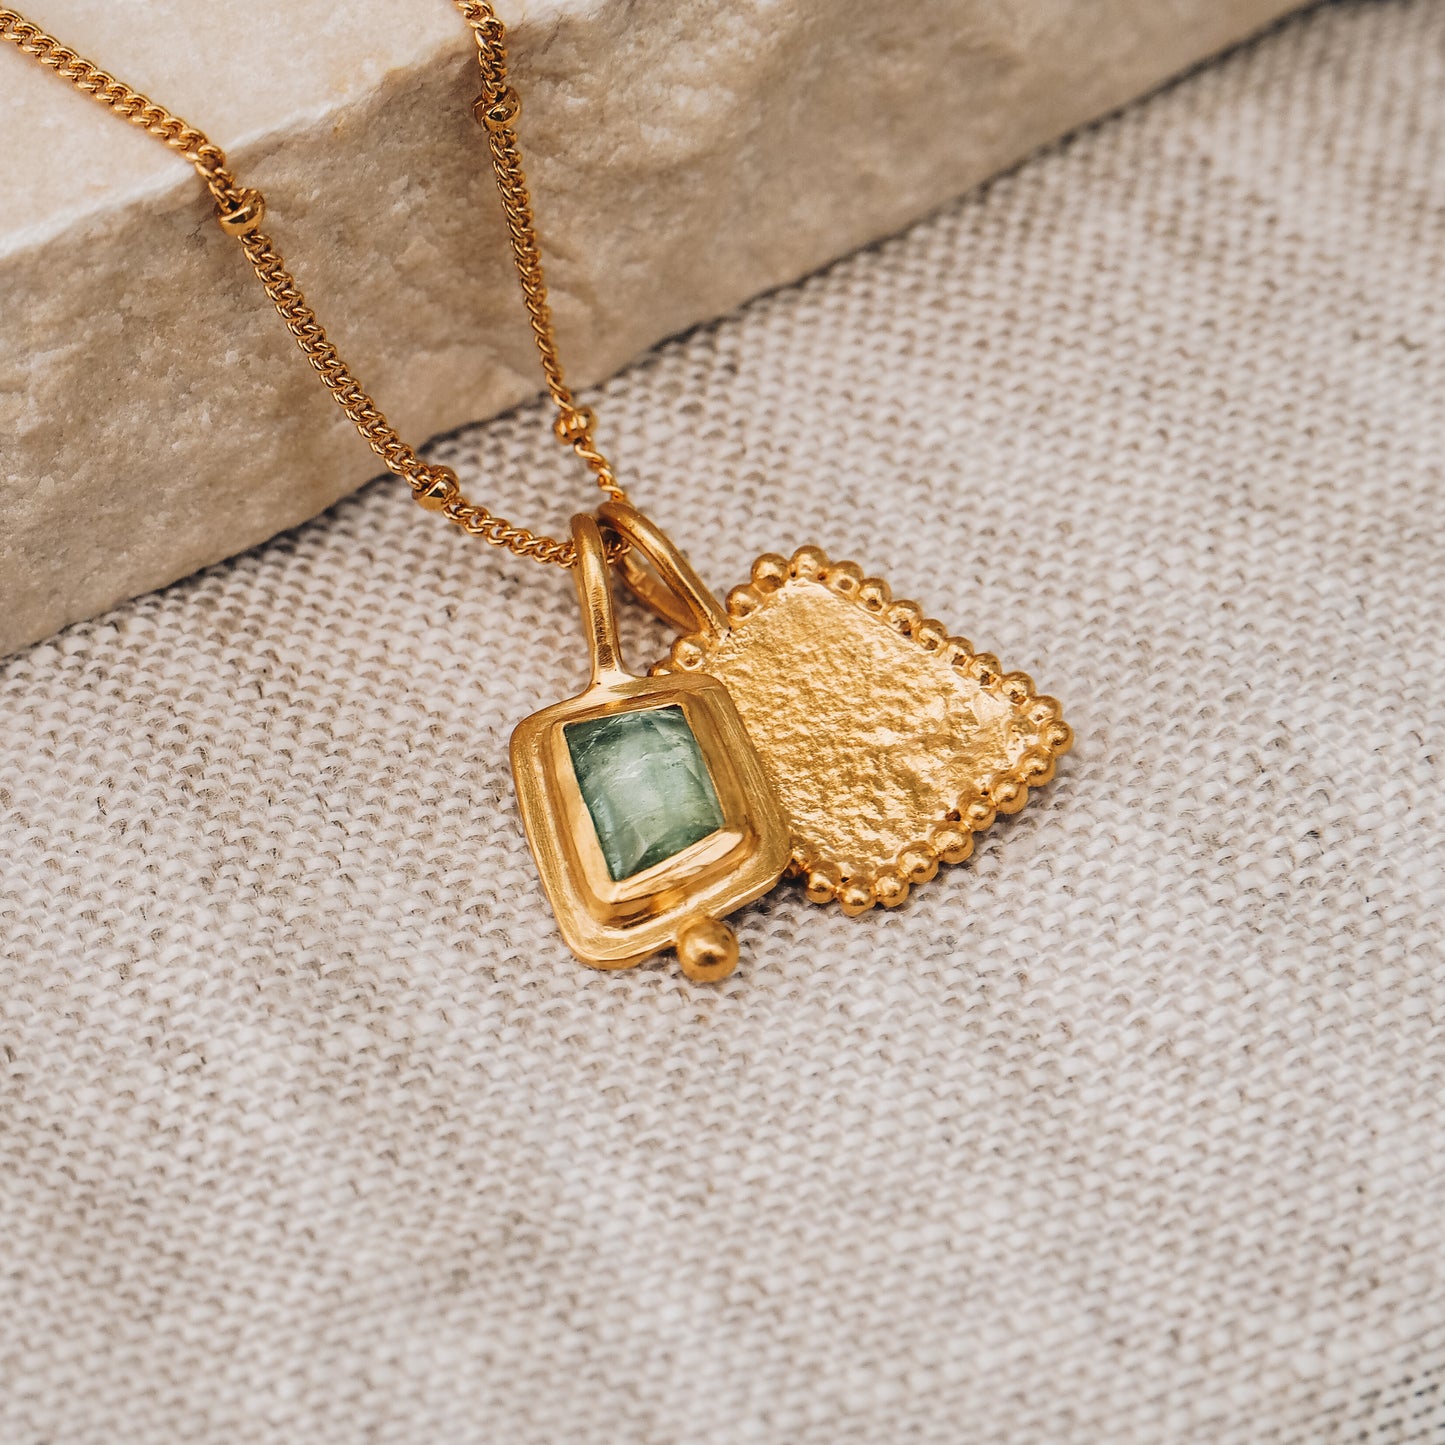 Square gold pendant featuring a breathtaking blue rose cut tourmaline gemstone and intricate granulation work, suspended from a dainty satellite chain.